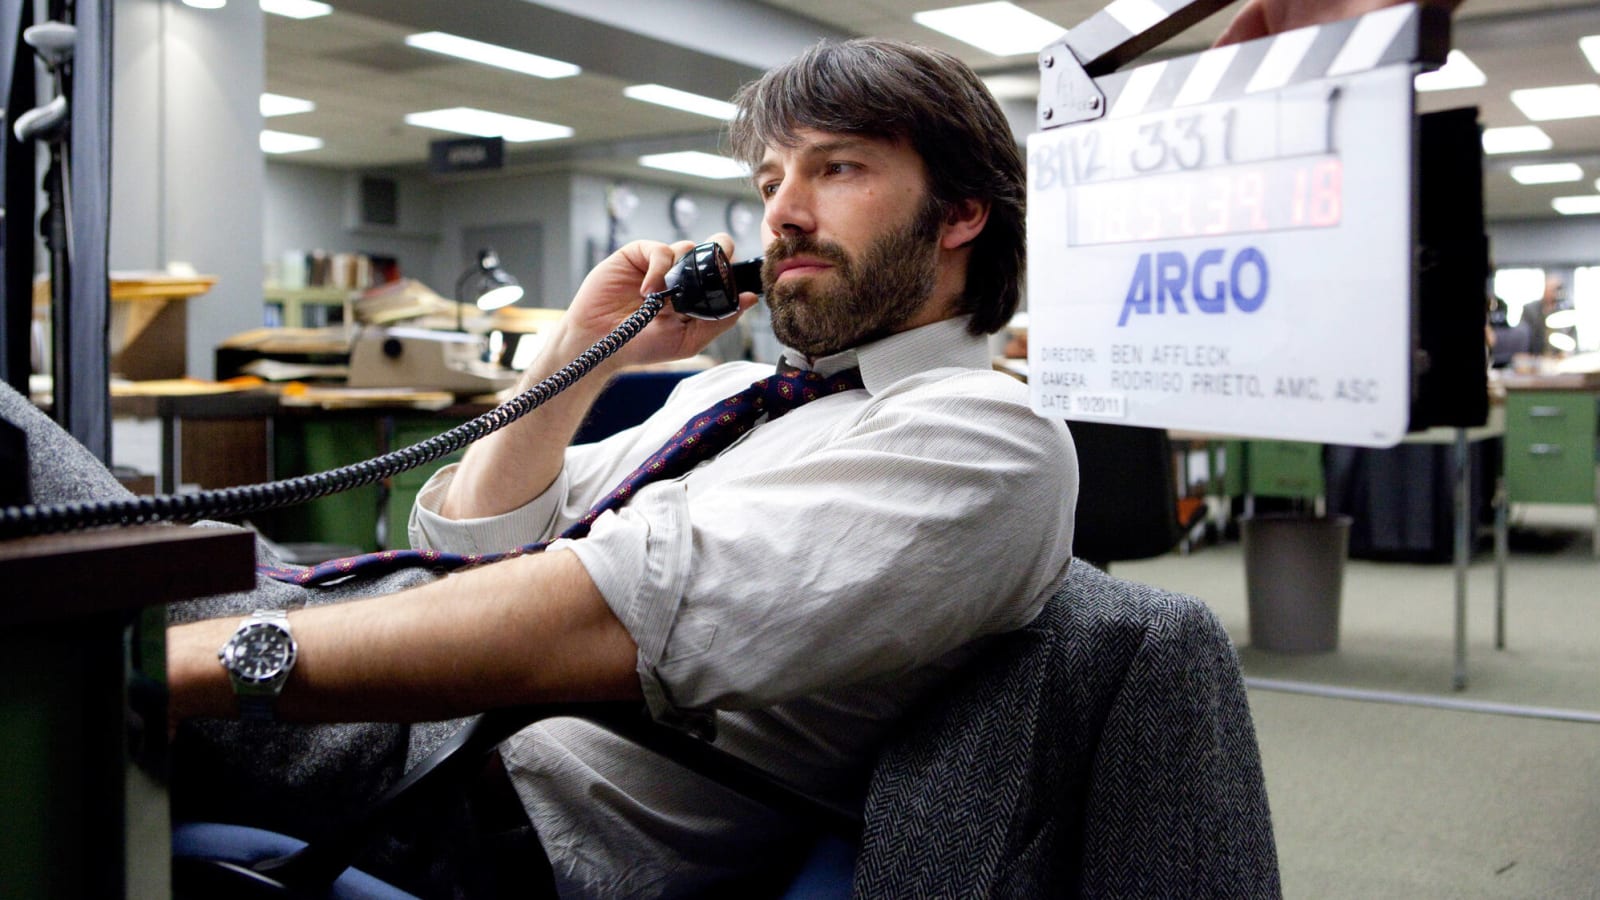 20 facts you might not know about 'Argo'